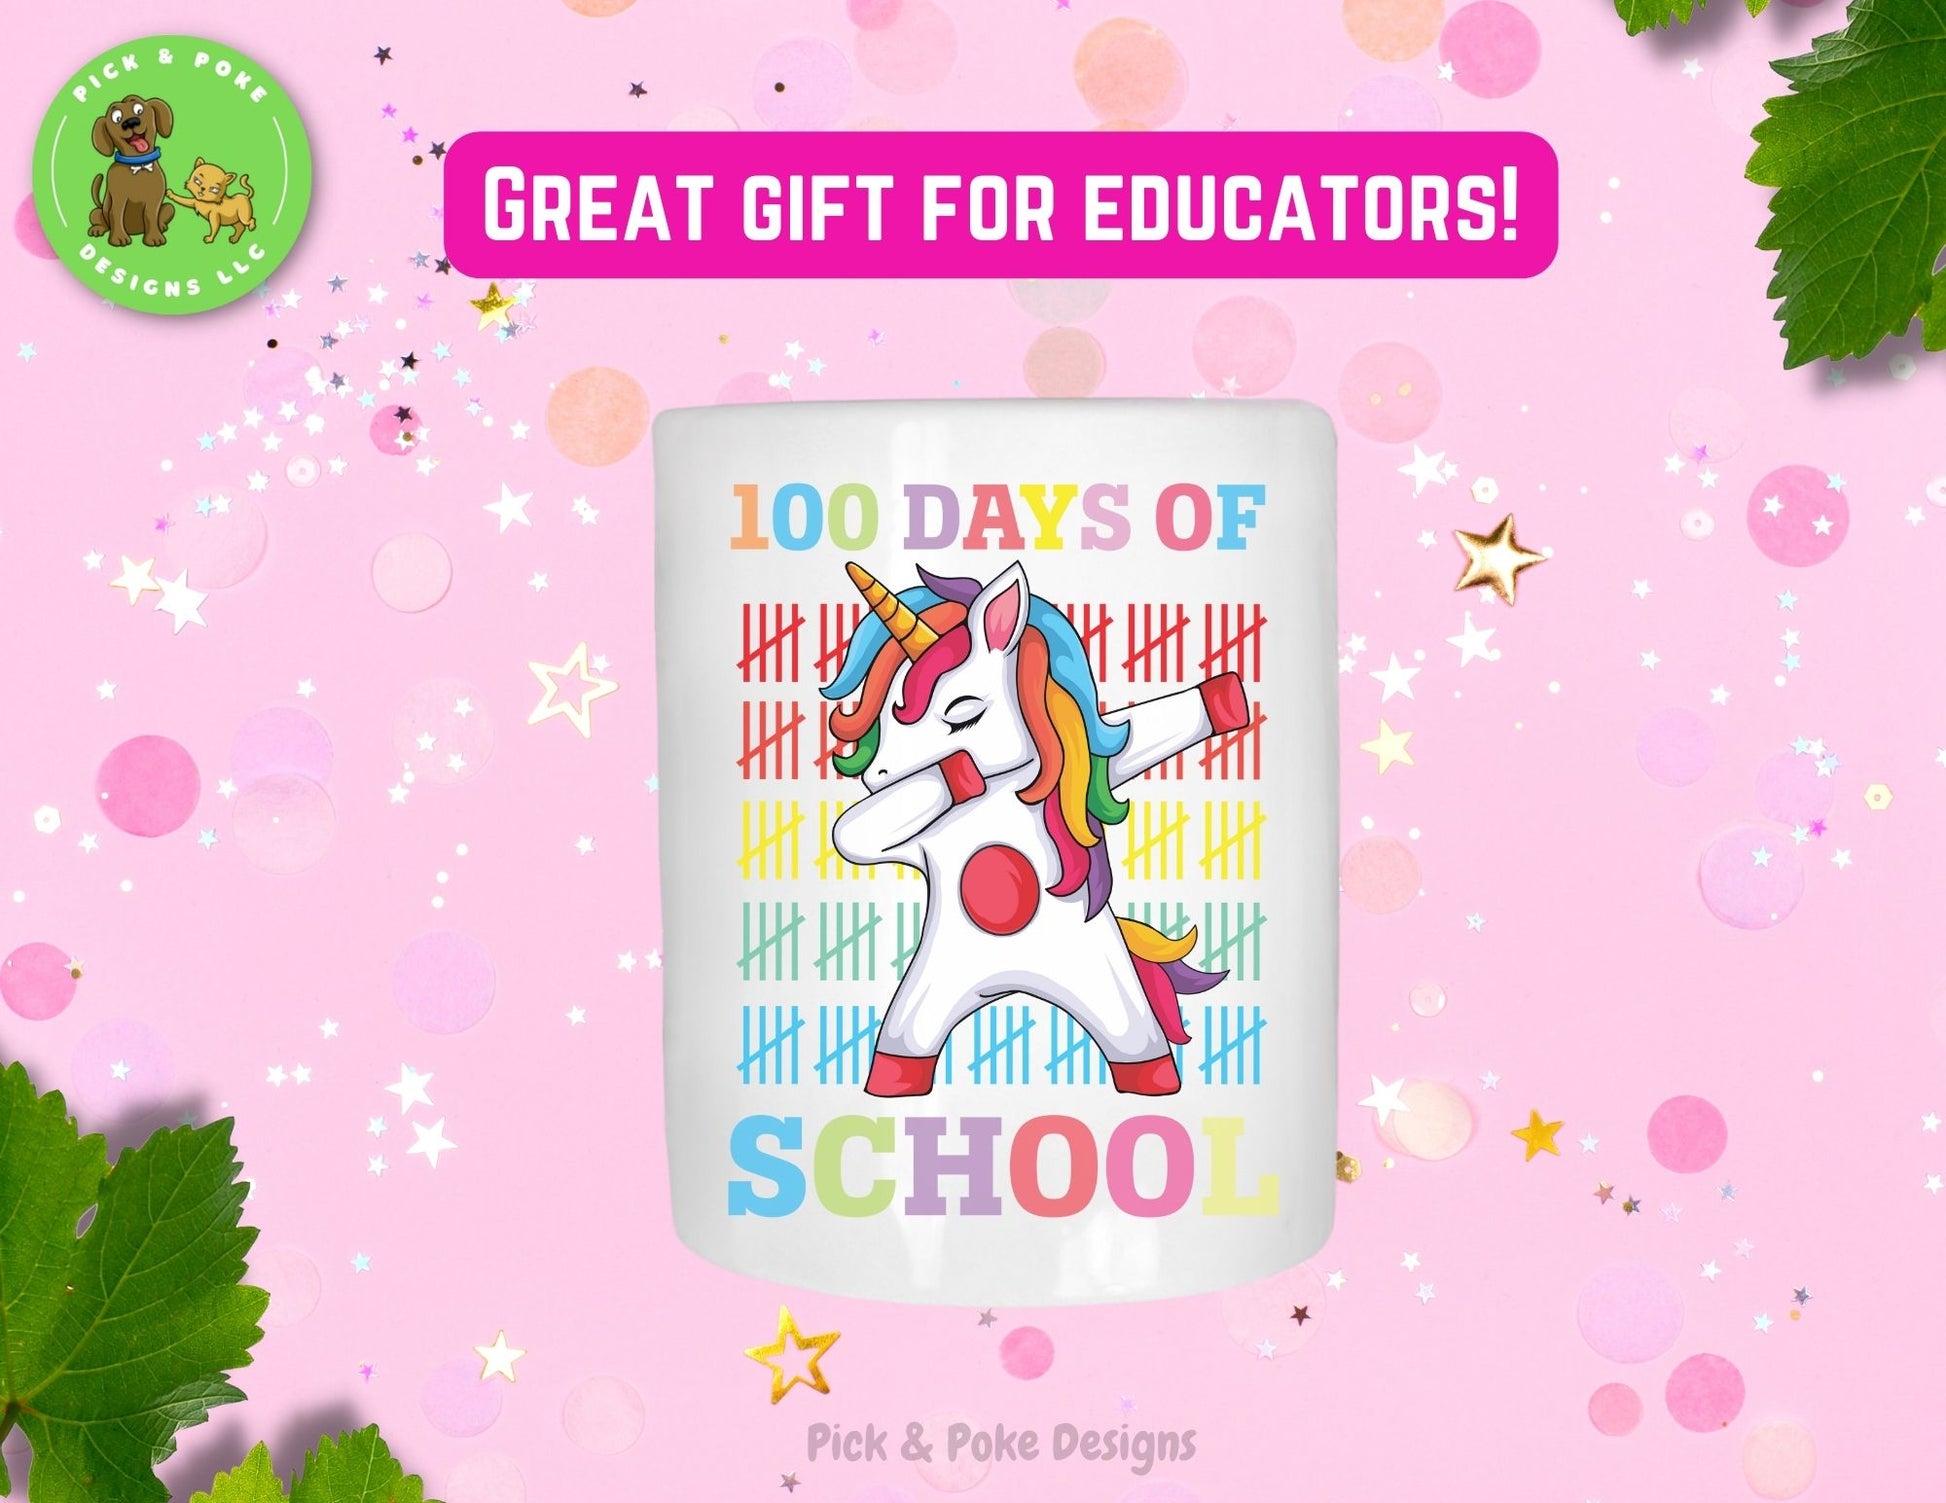 100 days of school ceramic pencil and pen holder makes a great gift for educators